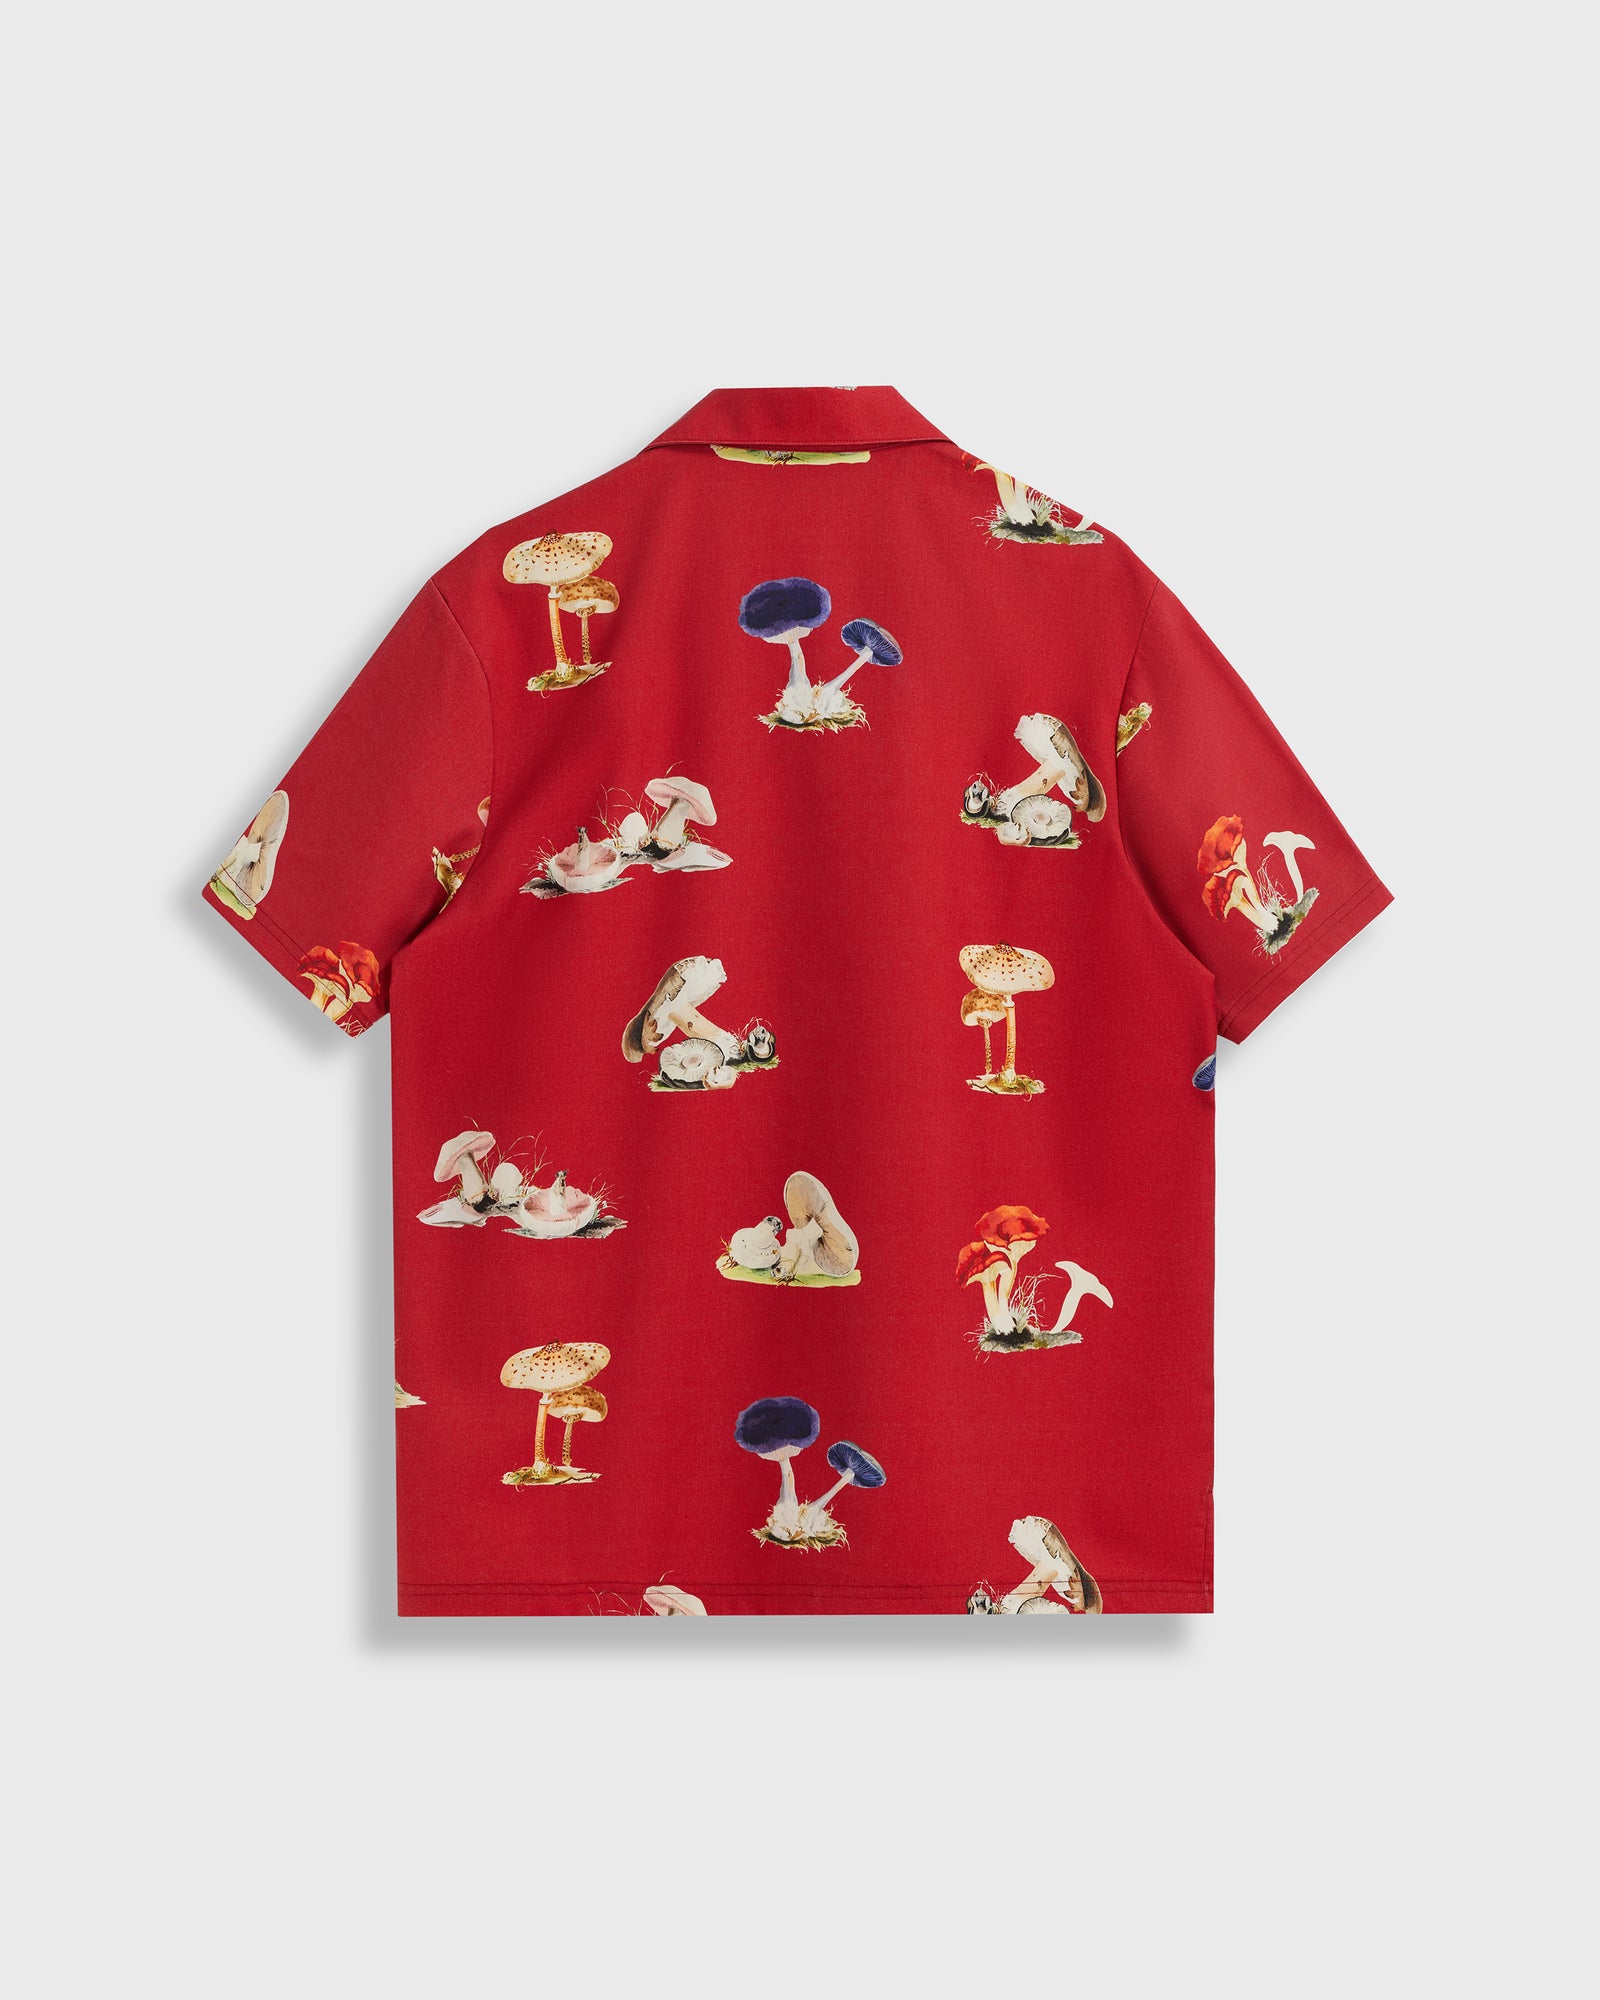 Photo of Foraging Bowling Shirt, number 6